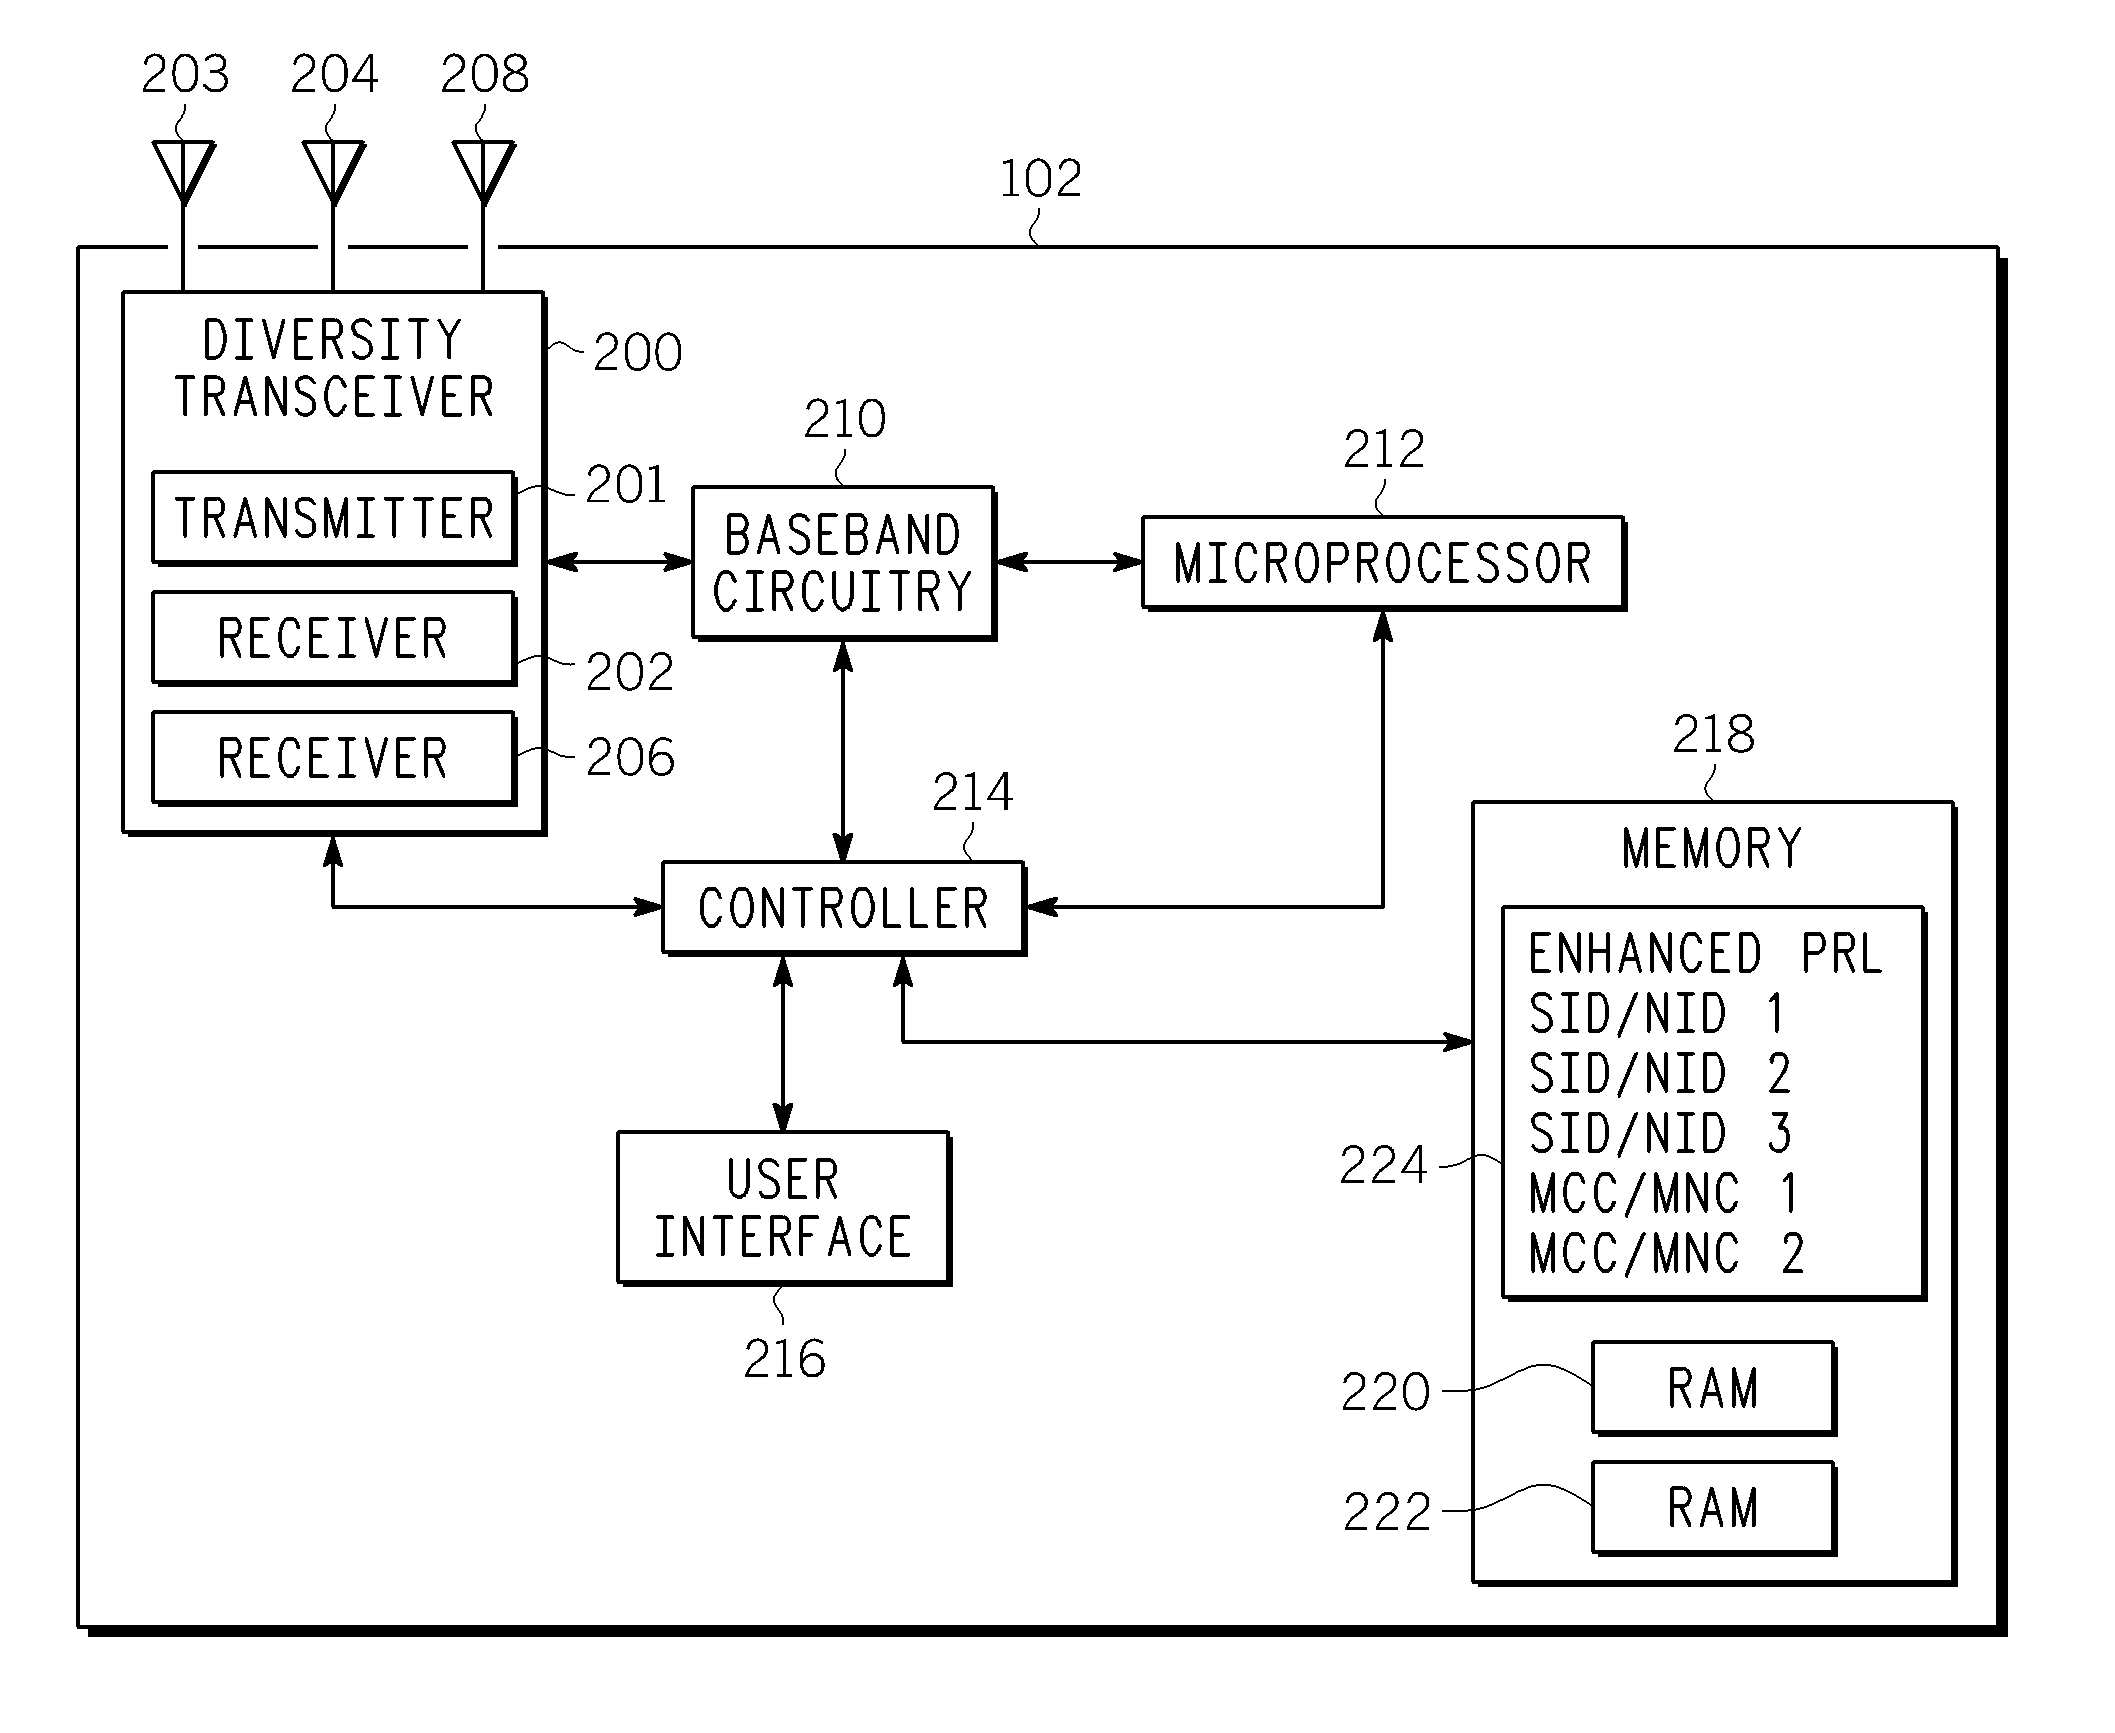 Method and System for Utilizing Transmit Local Oscillator for Improved Cell Search and Multi-Link Communication in Multi-Mode Device